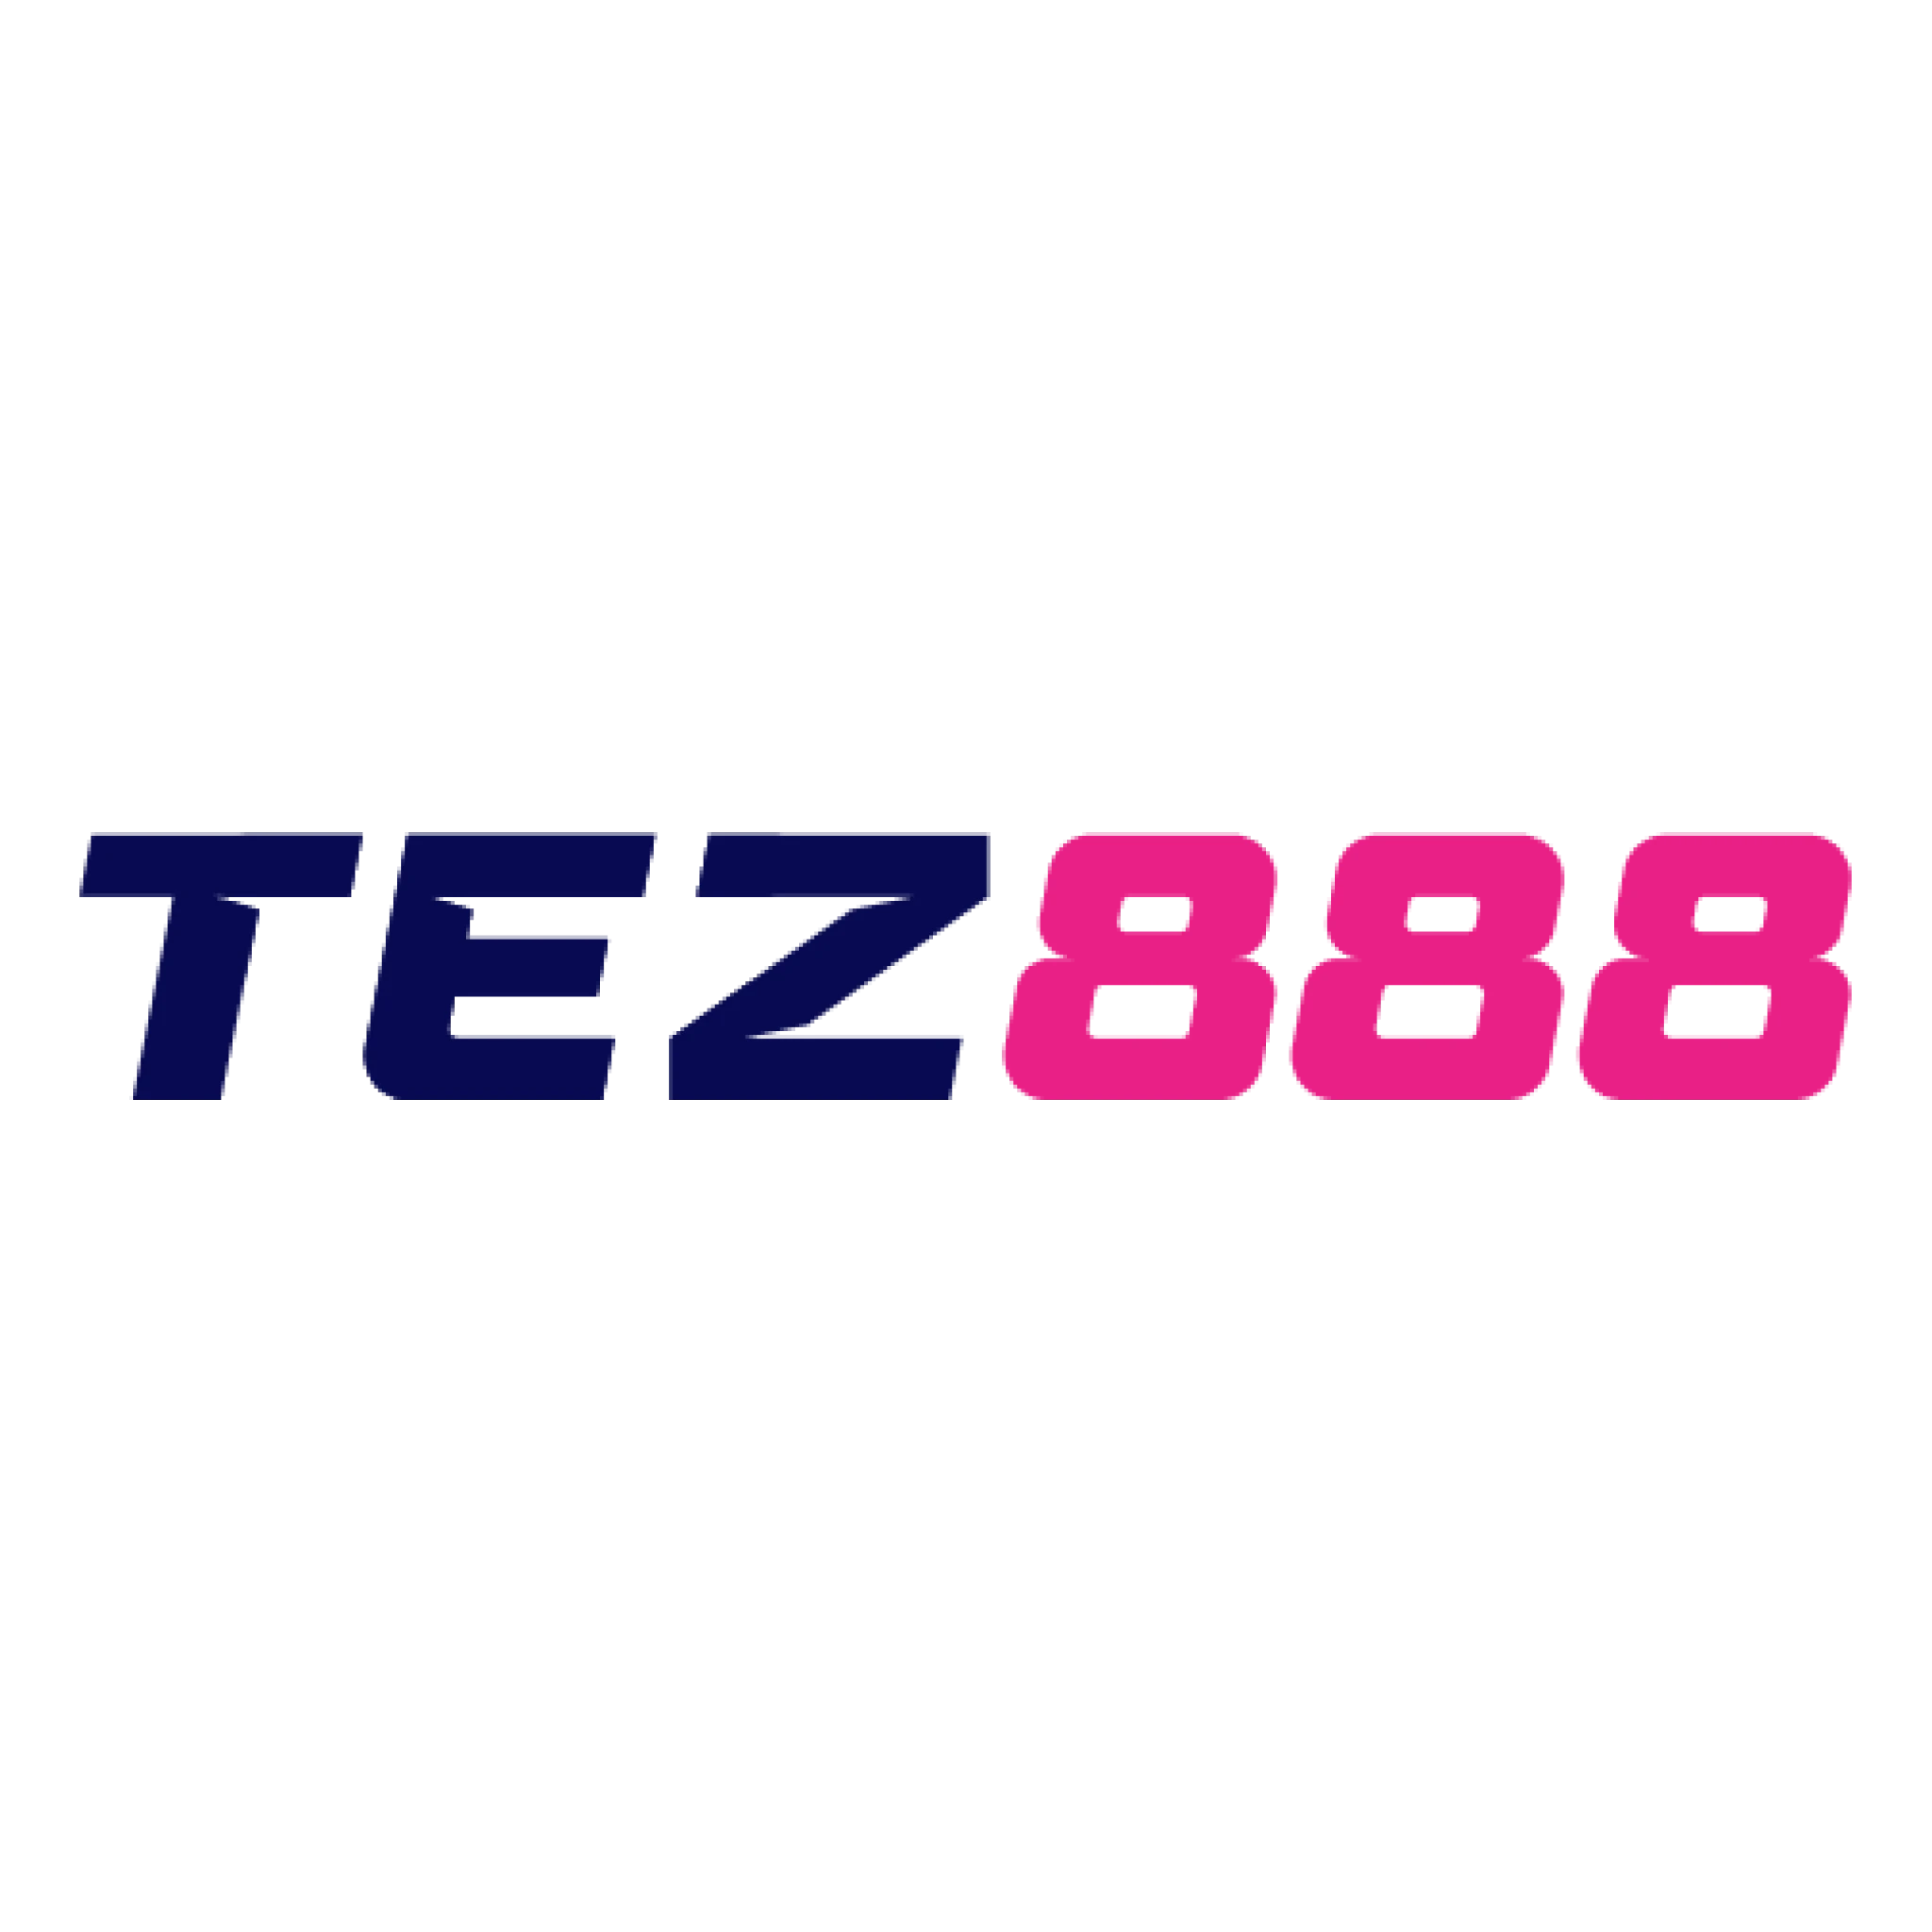 Tez888 consistently earns recognition for its exceptional offerings cricket betting services.